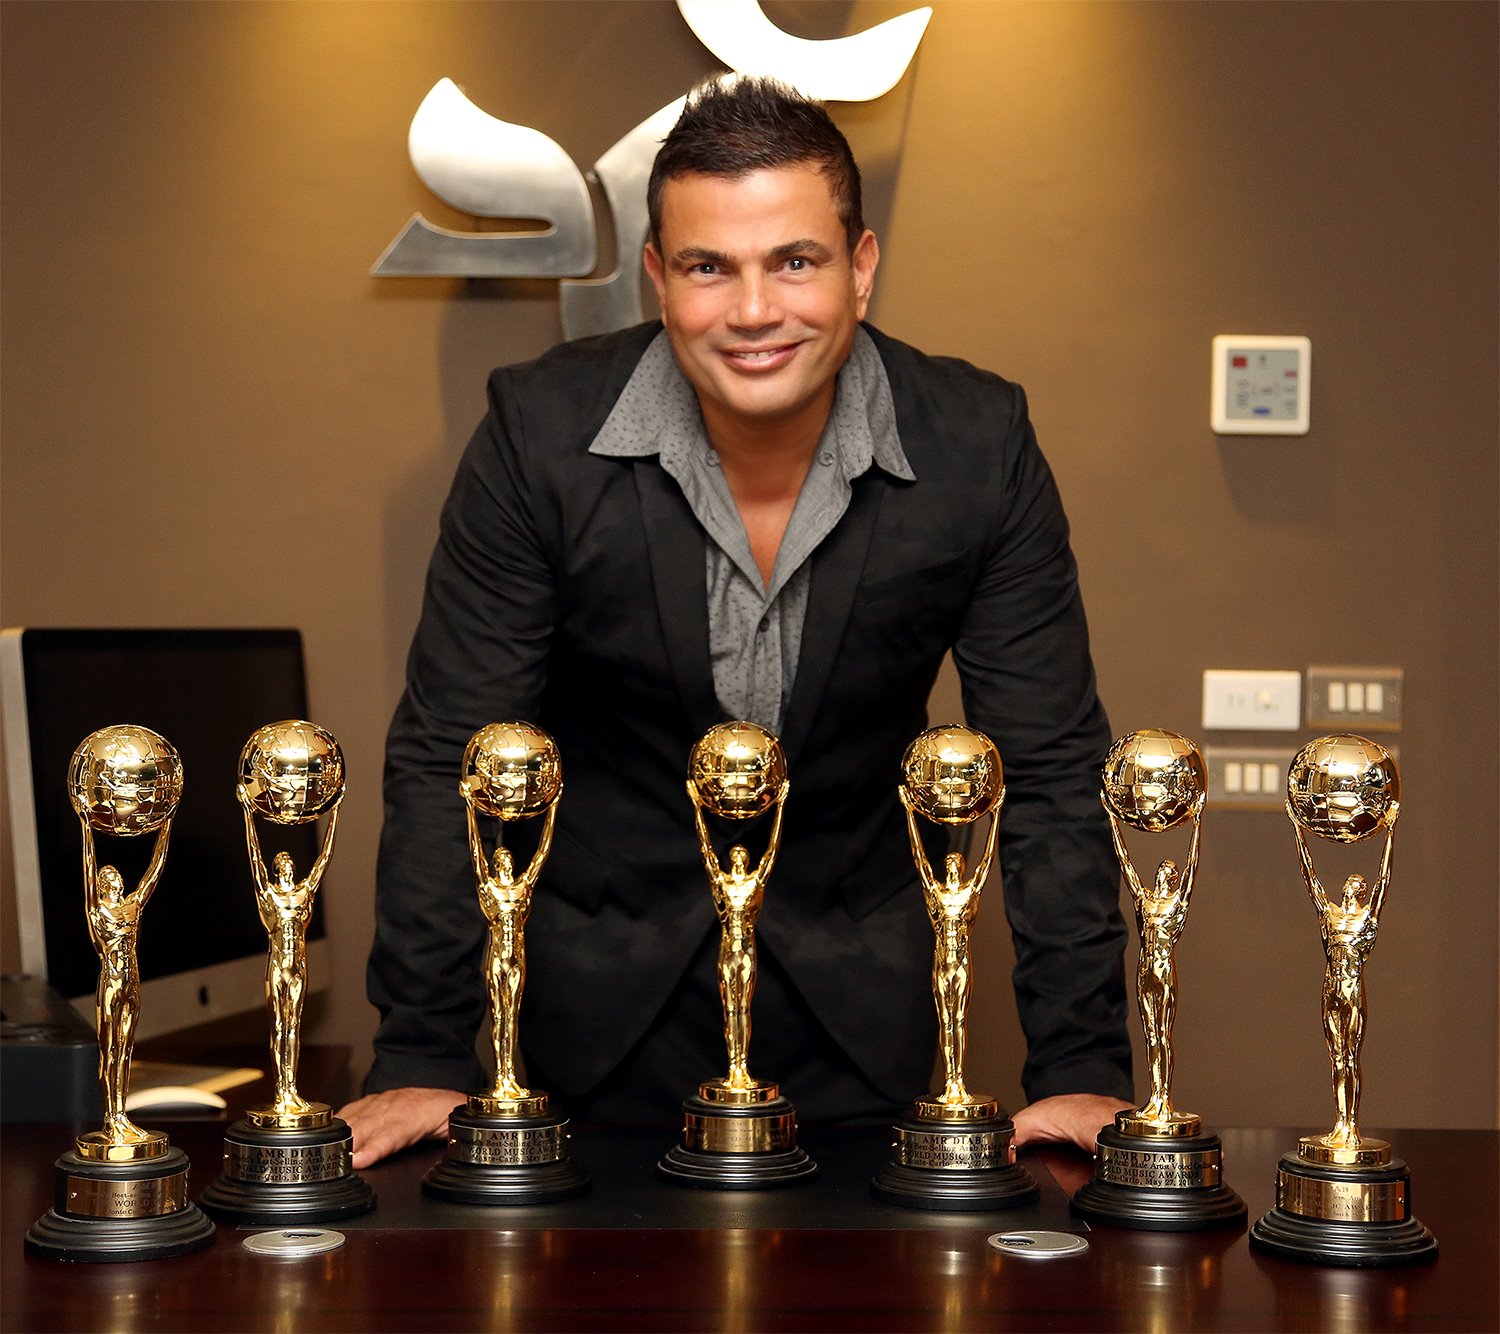 File:Amr Diab With World Music Awards.jpg - Wikimedia Commons